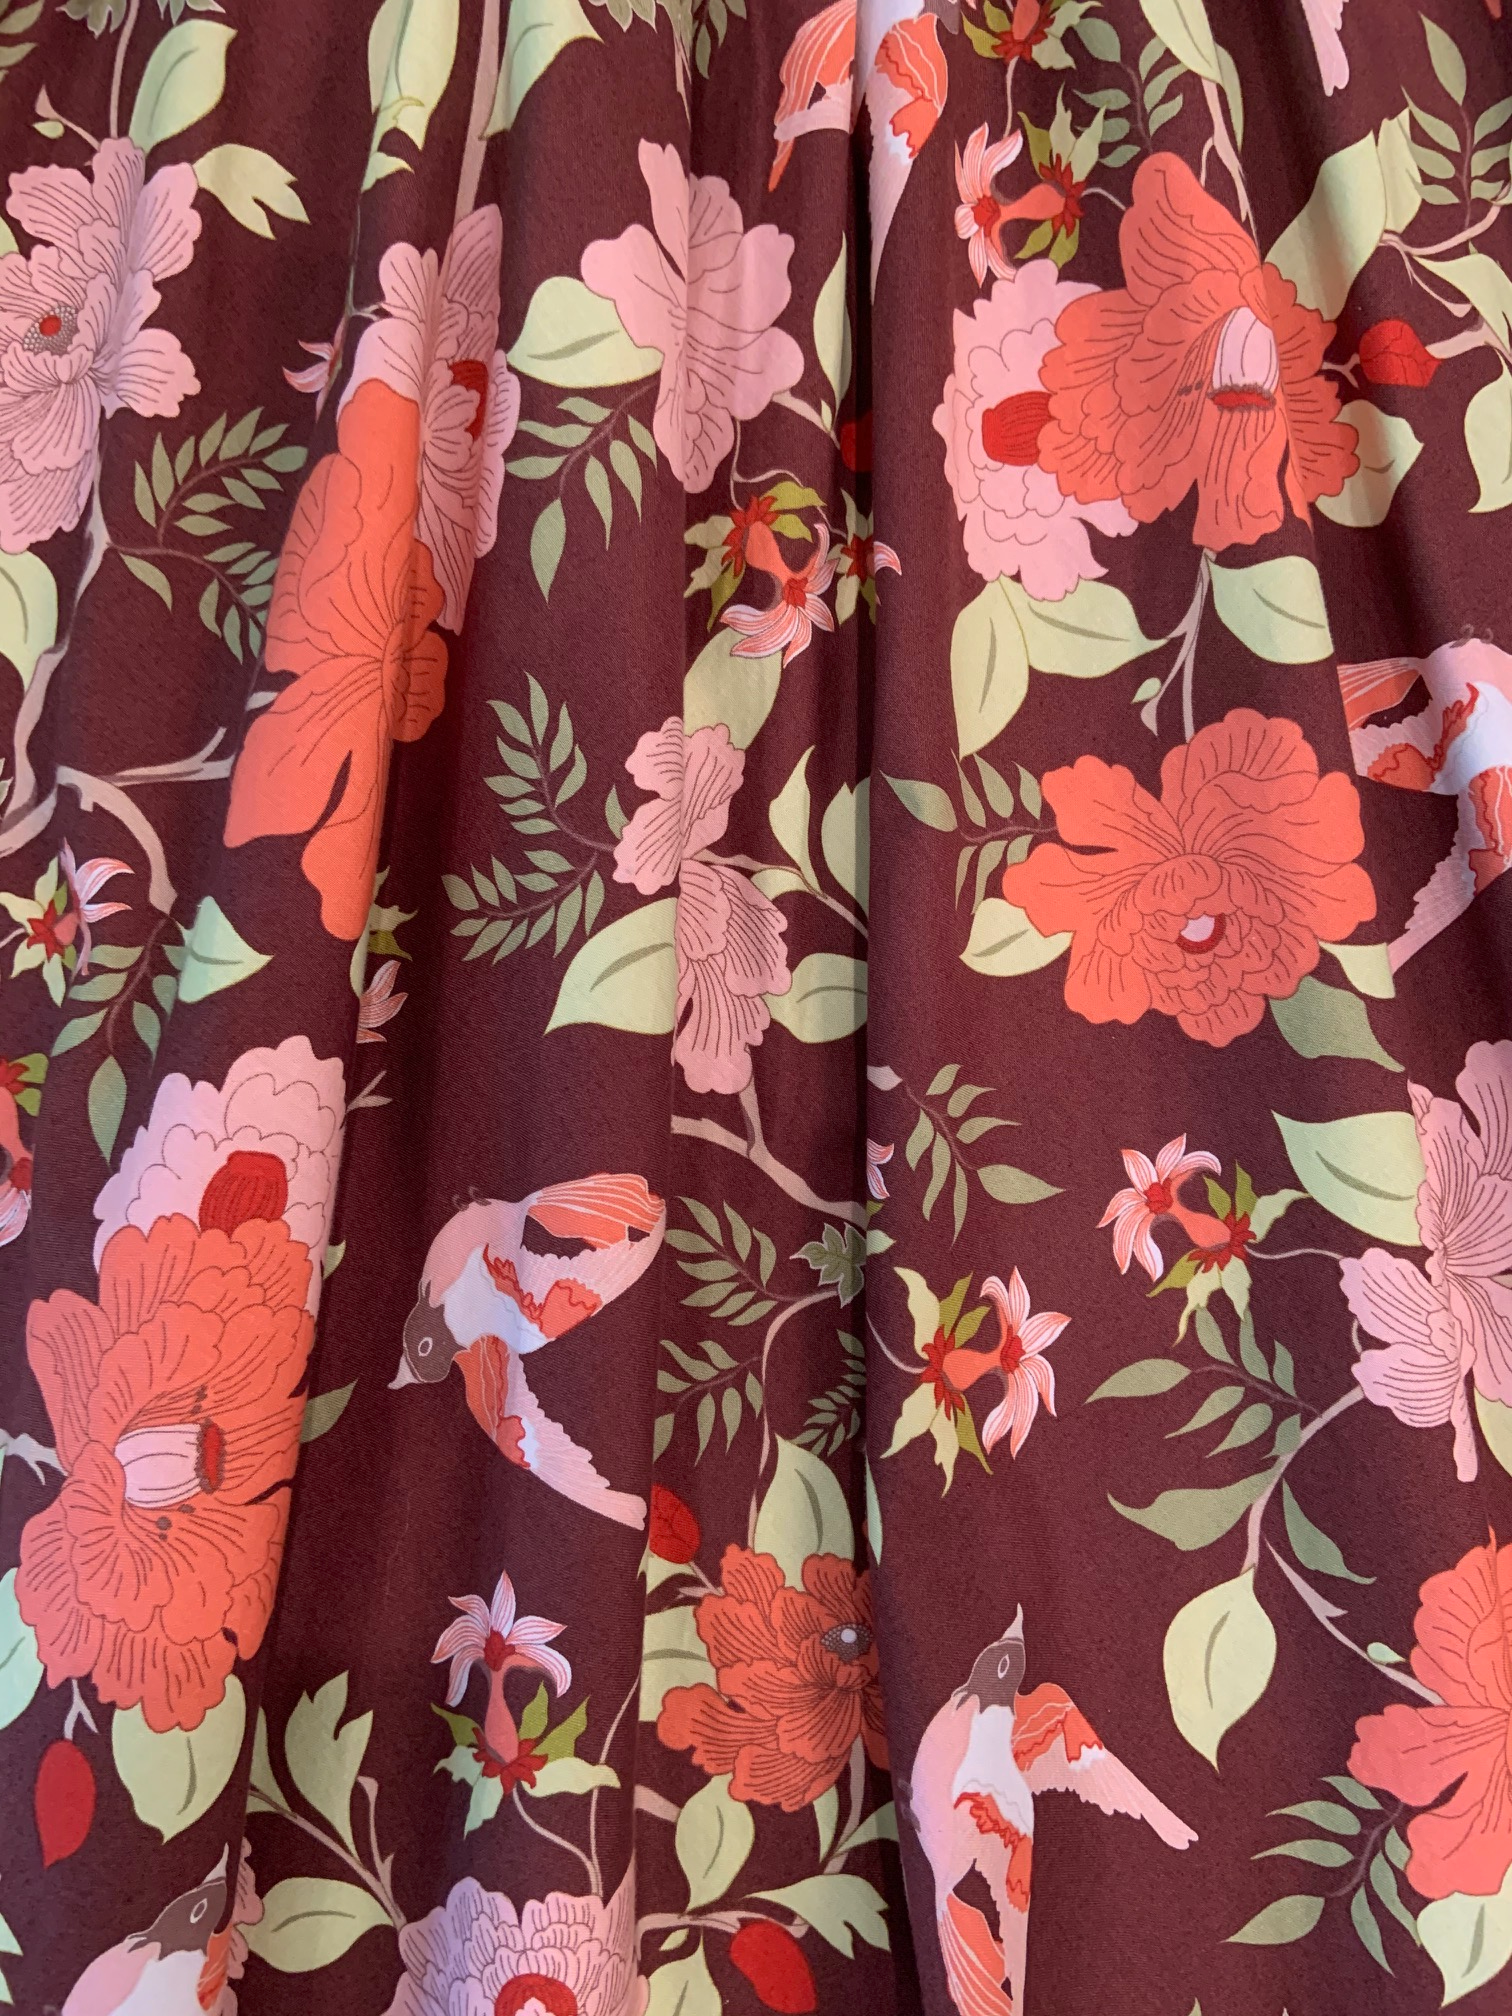 a close up of the floral print with orange and pink flower on brown base